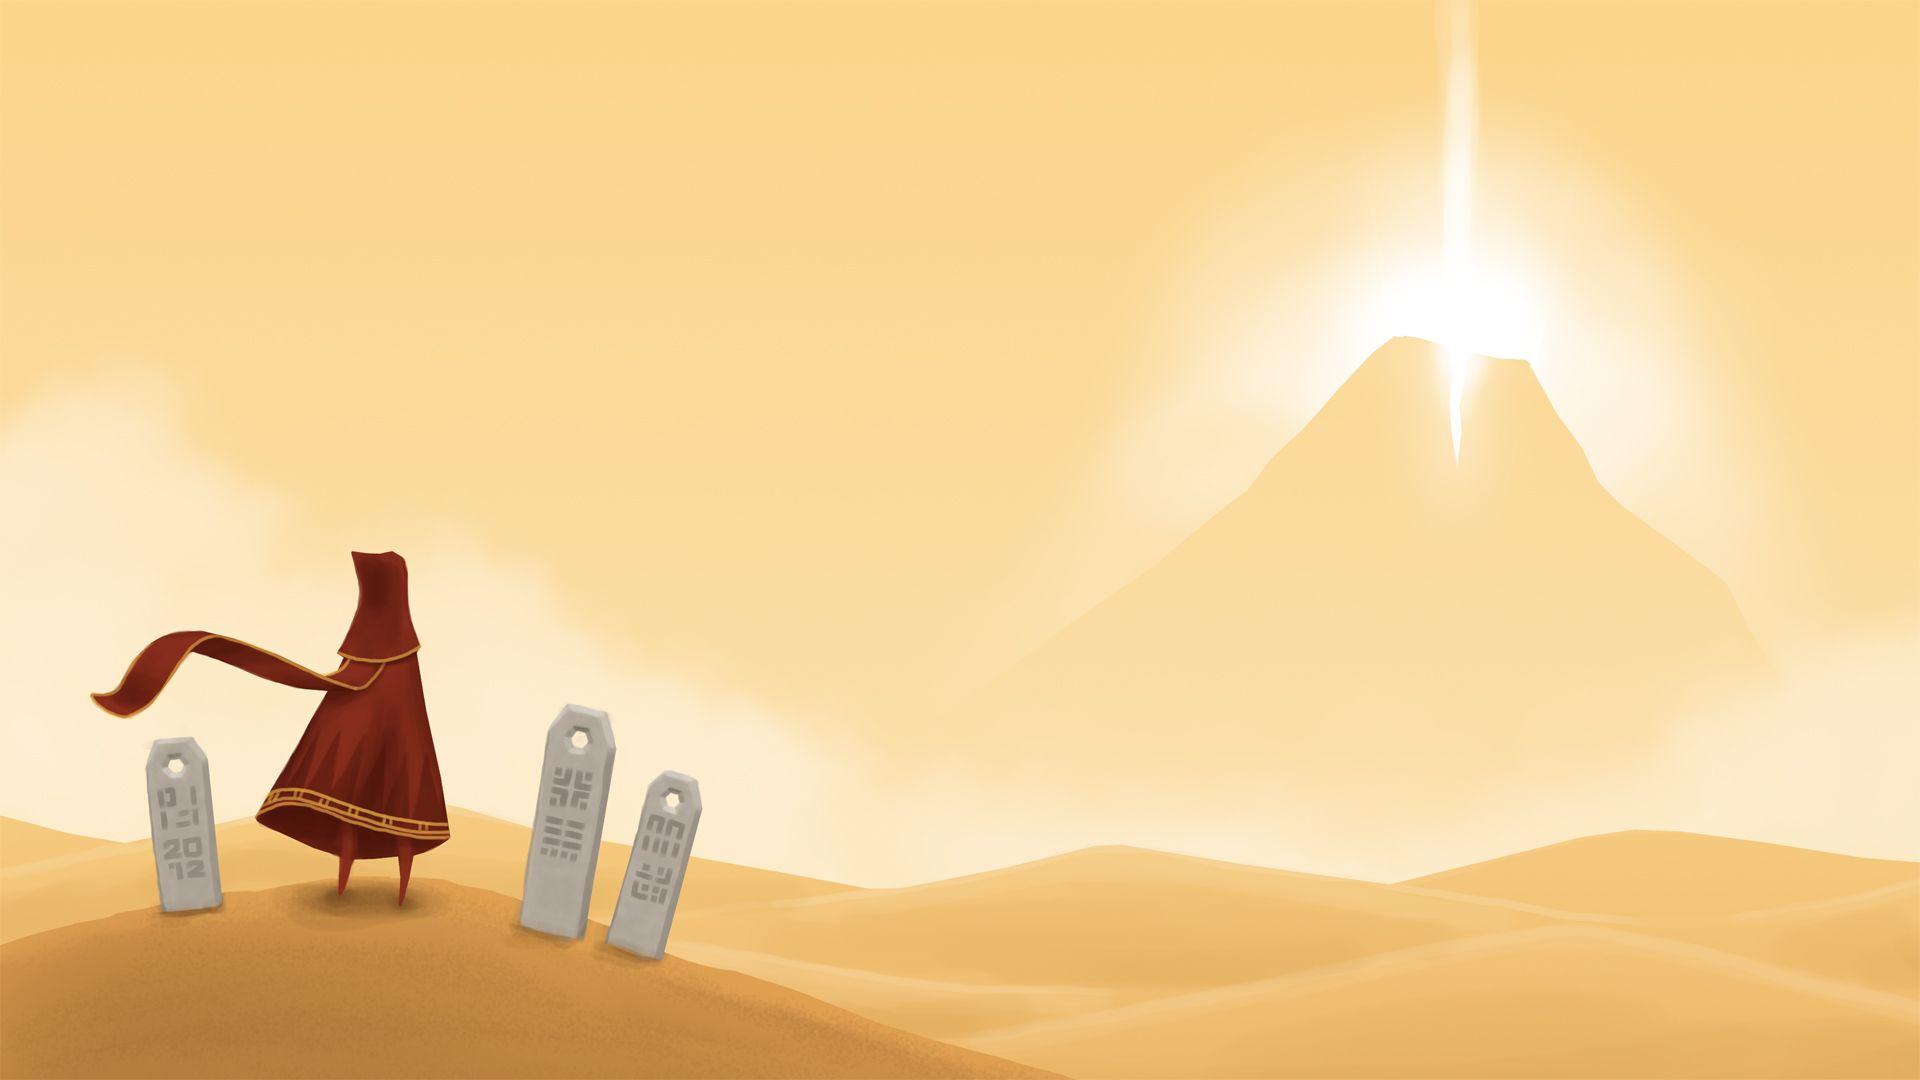 Widescreen Full HD Wallpaper of Journey Game for Windows and Mac